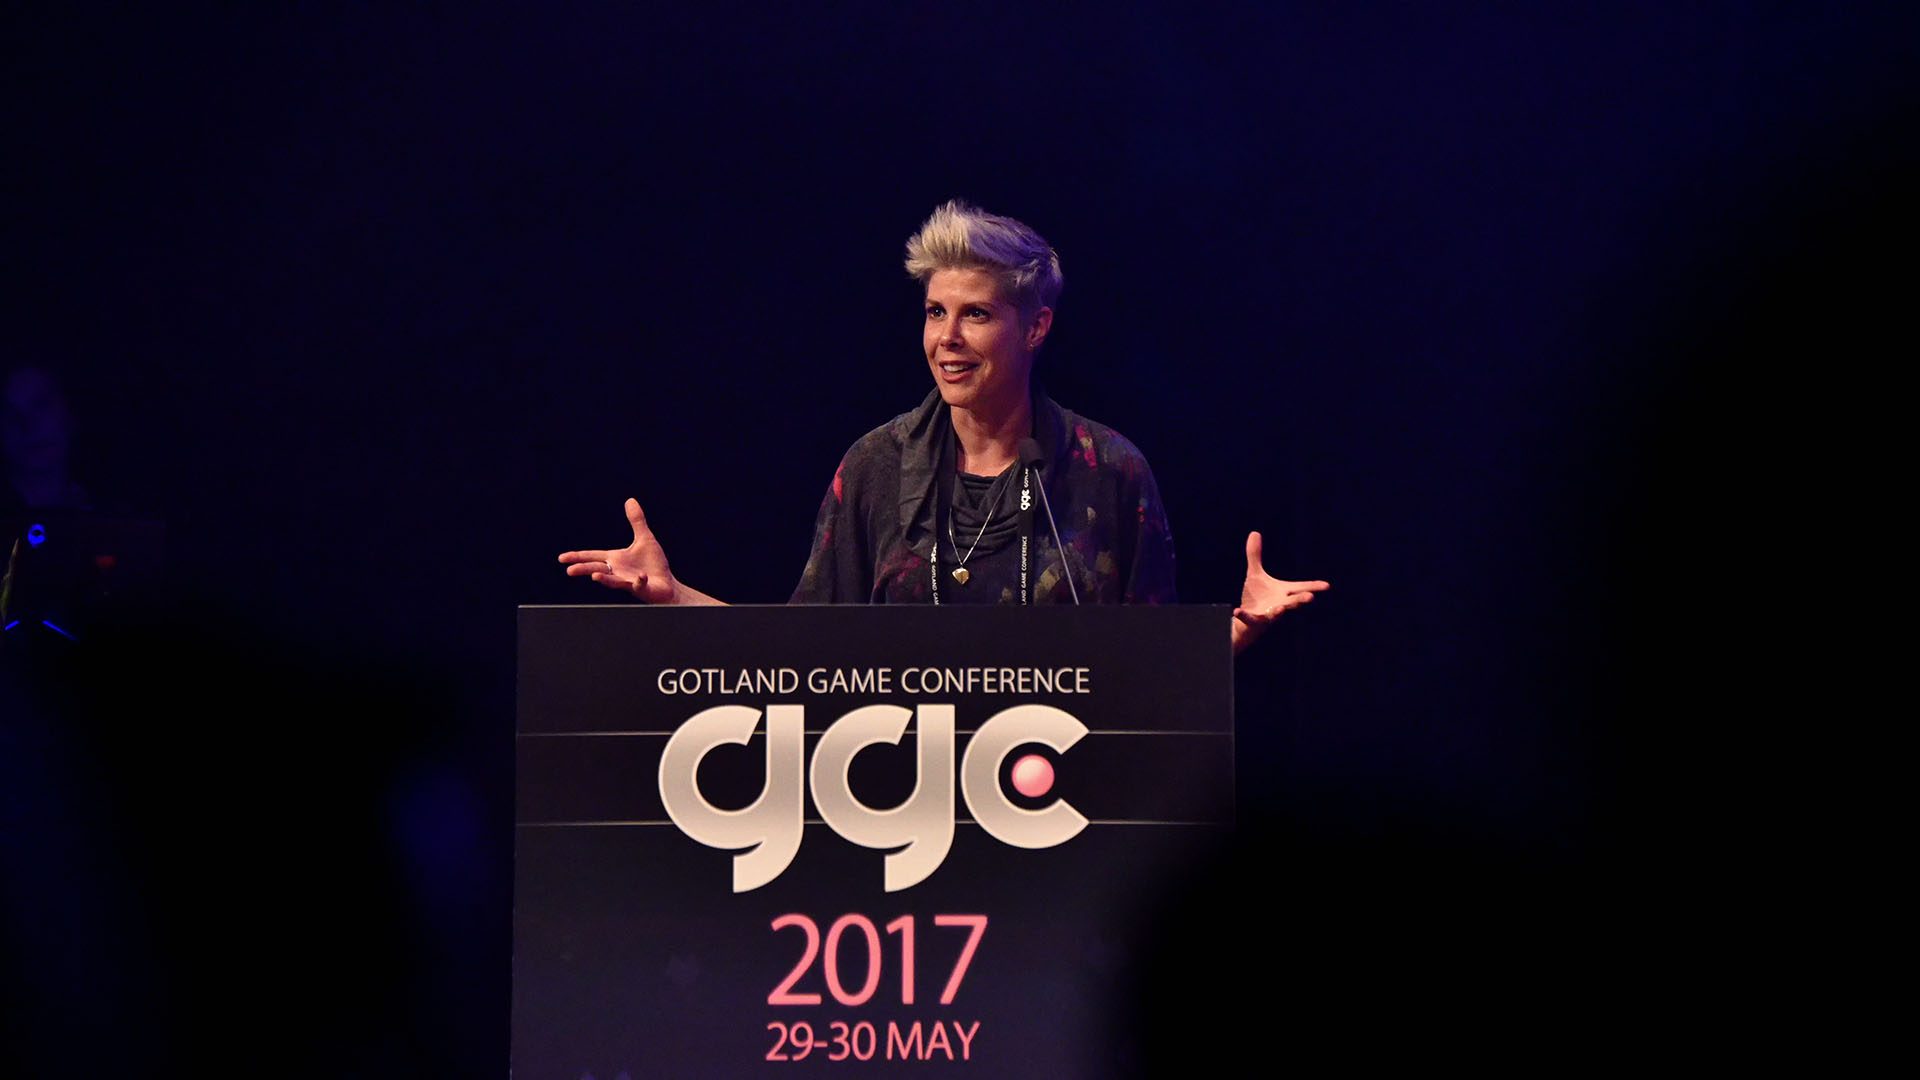 Doris C. Rusch on stage at the Gotland Game Conference 2017!